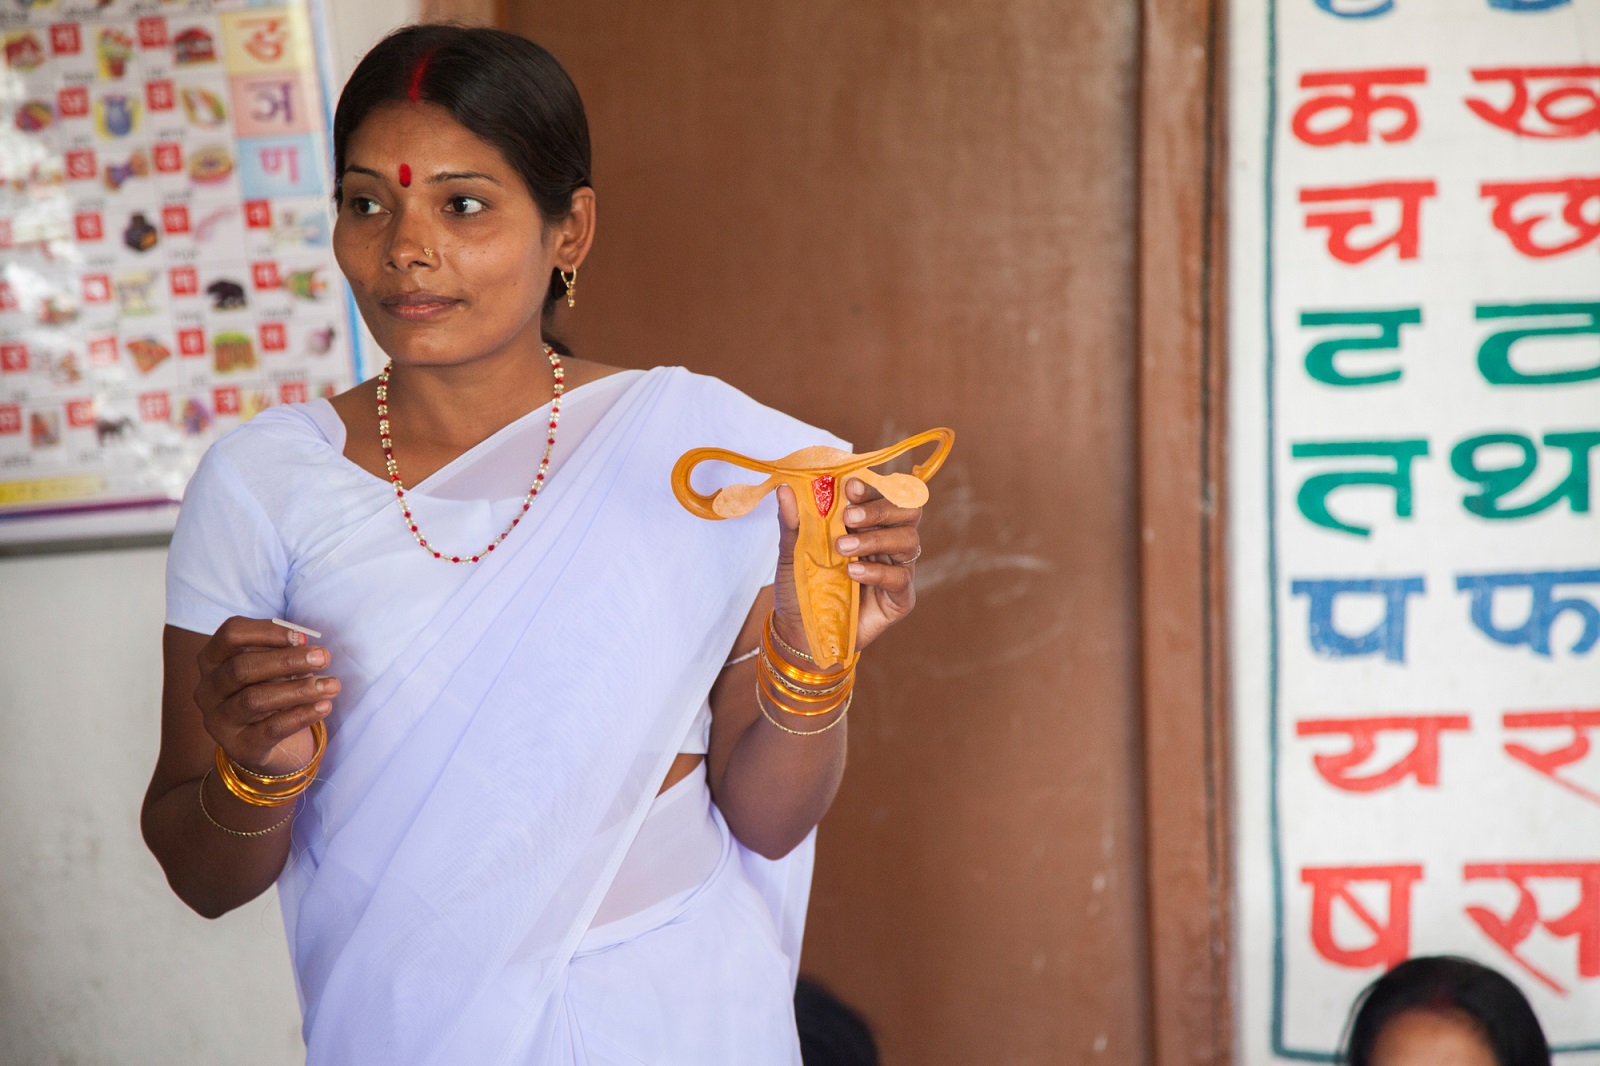 Auxilliary Nurse & Midwife Supriya Kumari (in plain white sari) uses a demonstartion Copper T and a Uterus model during a Sub-centre meeting of Frontline Health Workers at an Anganwadi Centre in Shahideeh village in Navhatta East block, Saharsa district, Bihar, India.